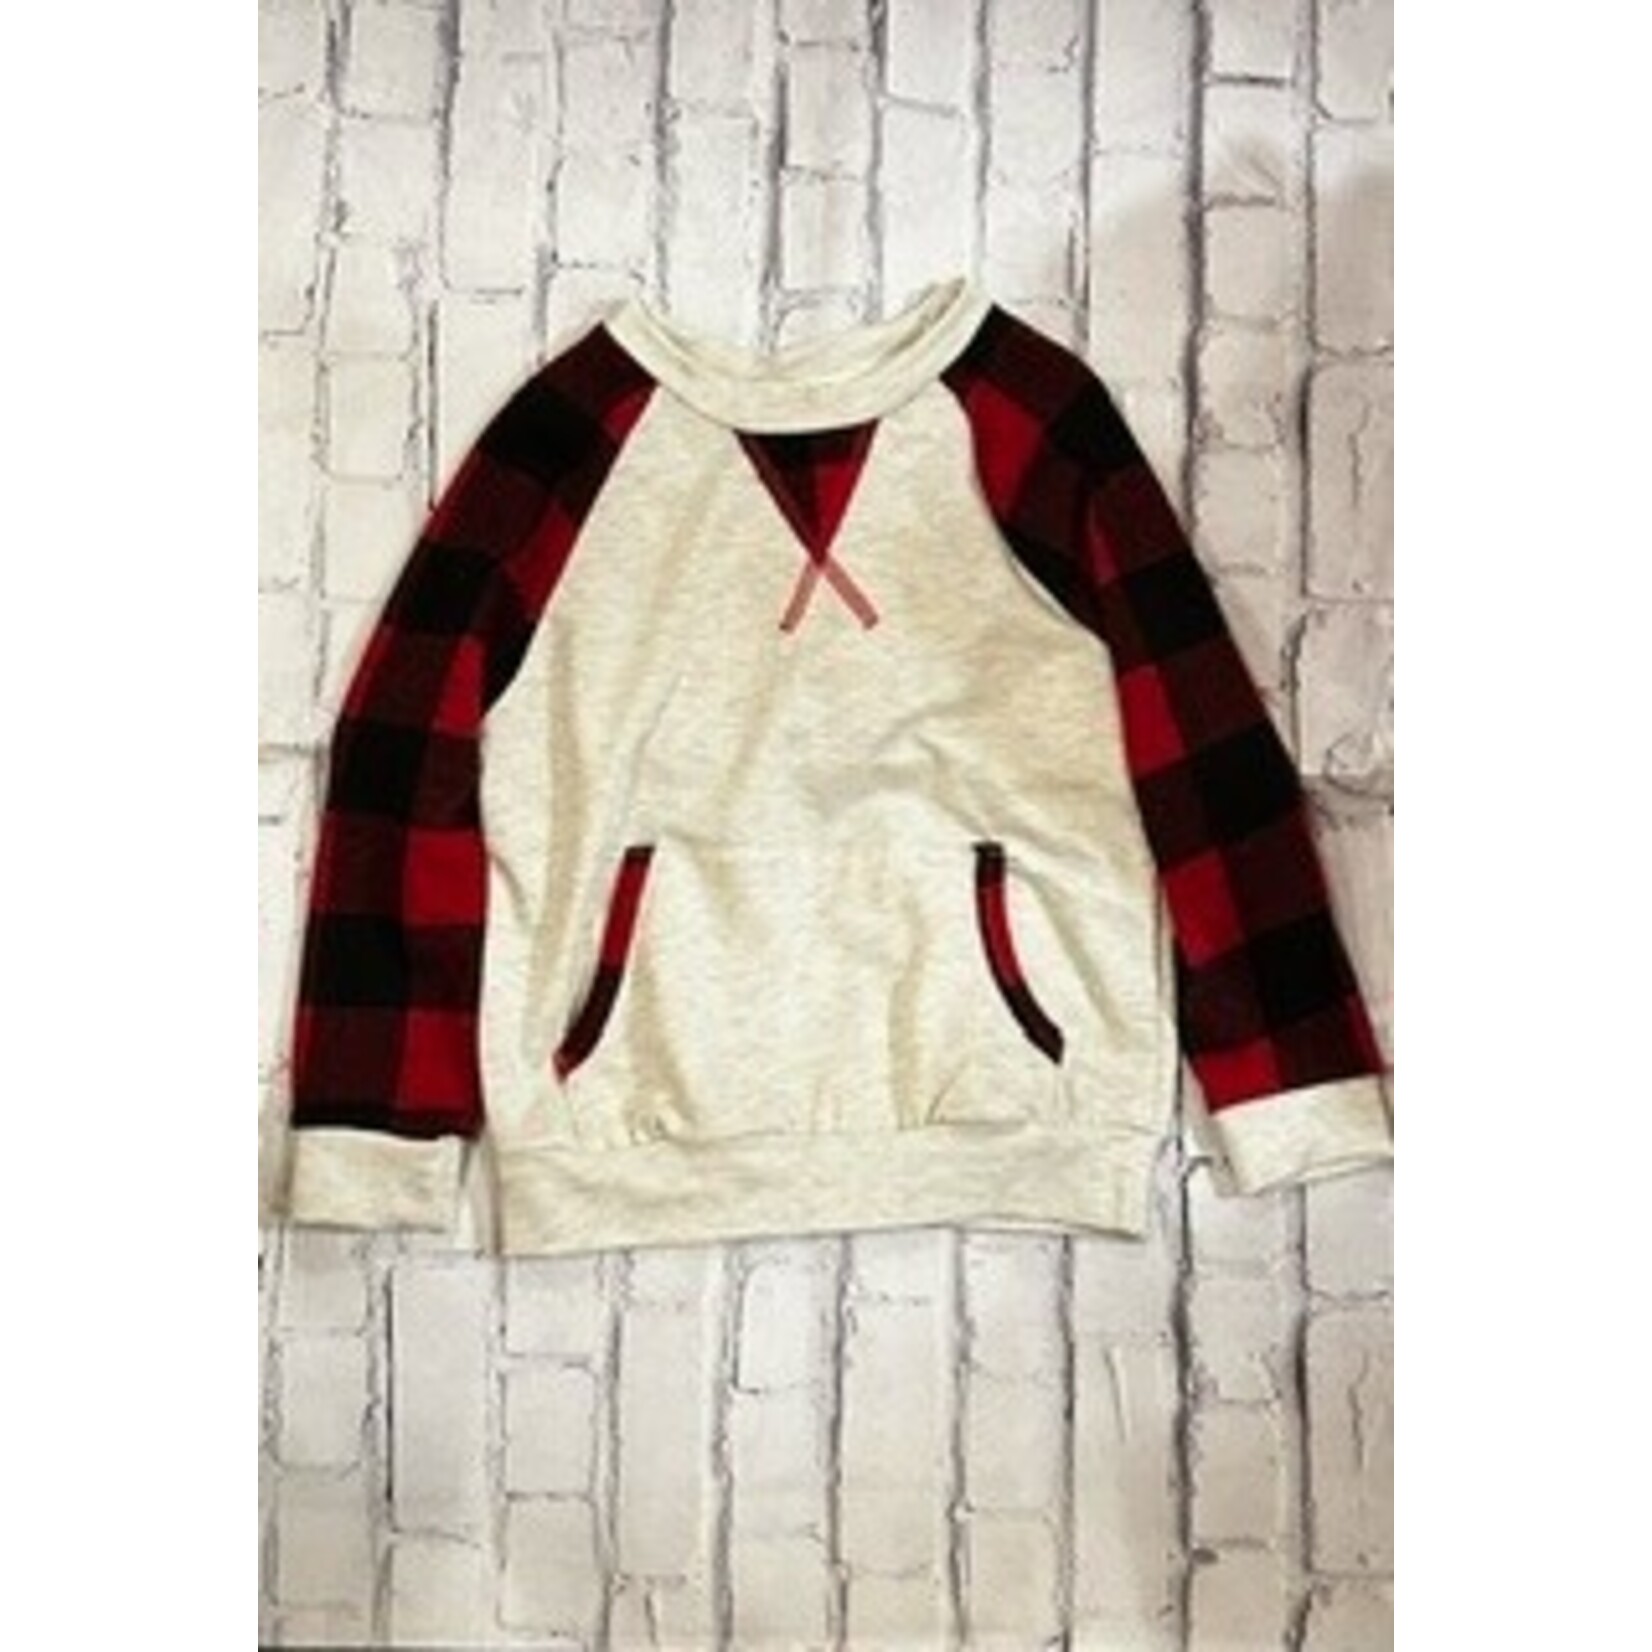 12PM 12PM Long Sleeve Toddler Top with Pockets Buffalo Plaid Gray